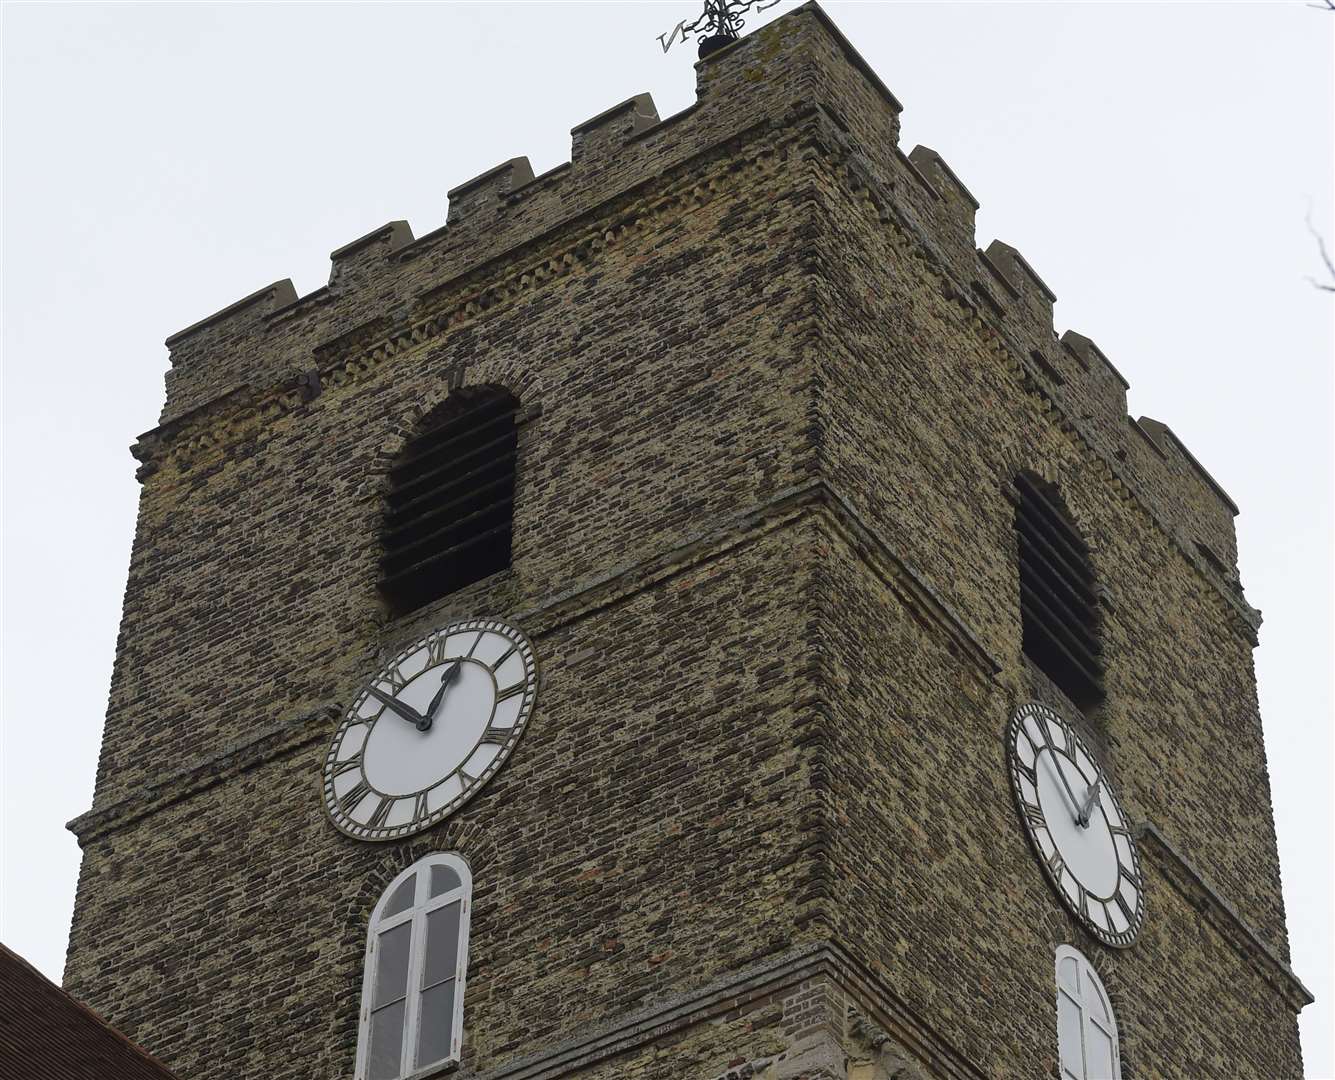 The clock chimes have not been sounding at night for three months, according to campaigners. Picture: Tony Flashman